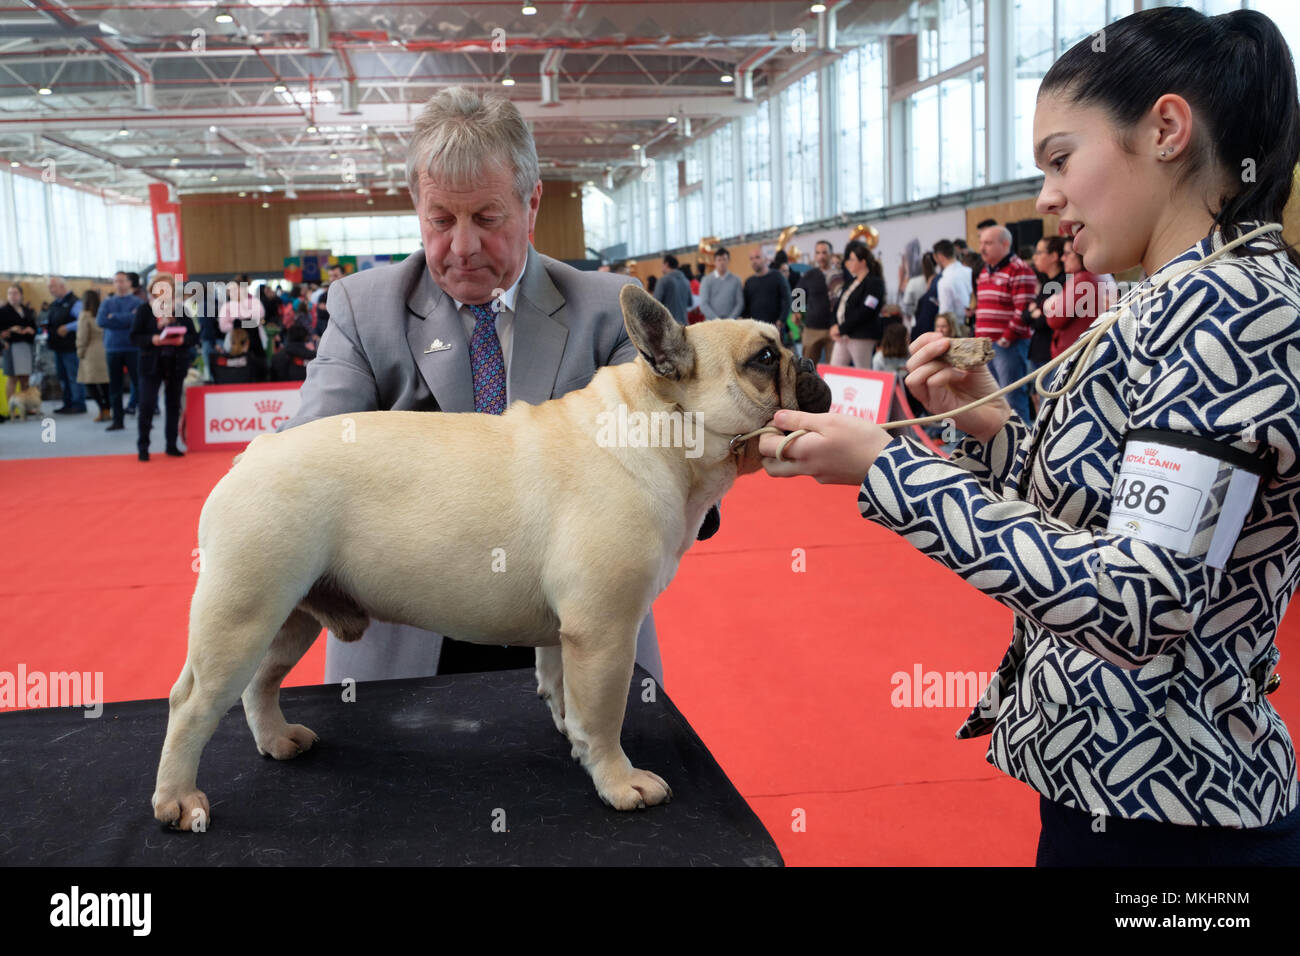 Jury member examining a French Bulldog during a dog show competition Stock Photo